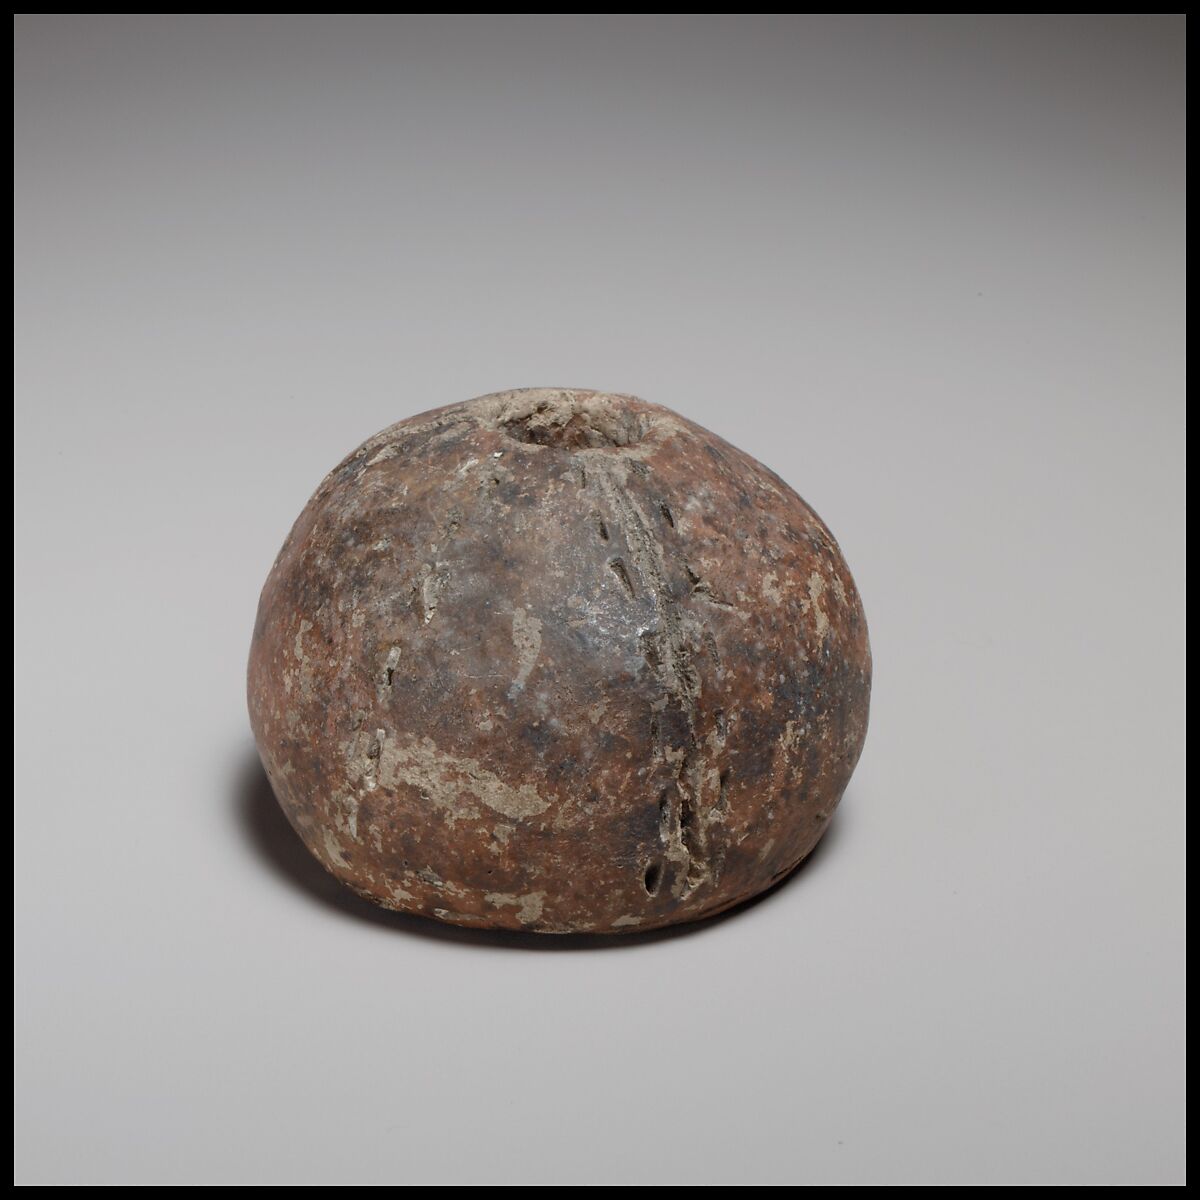 Spherical spindle-whorl with flat base, Terracotta, Cypriot 